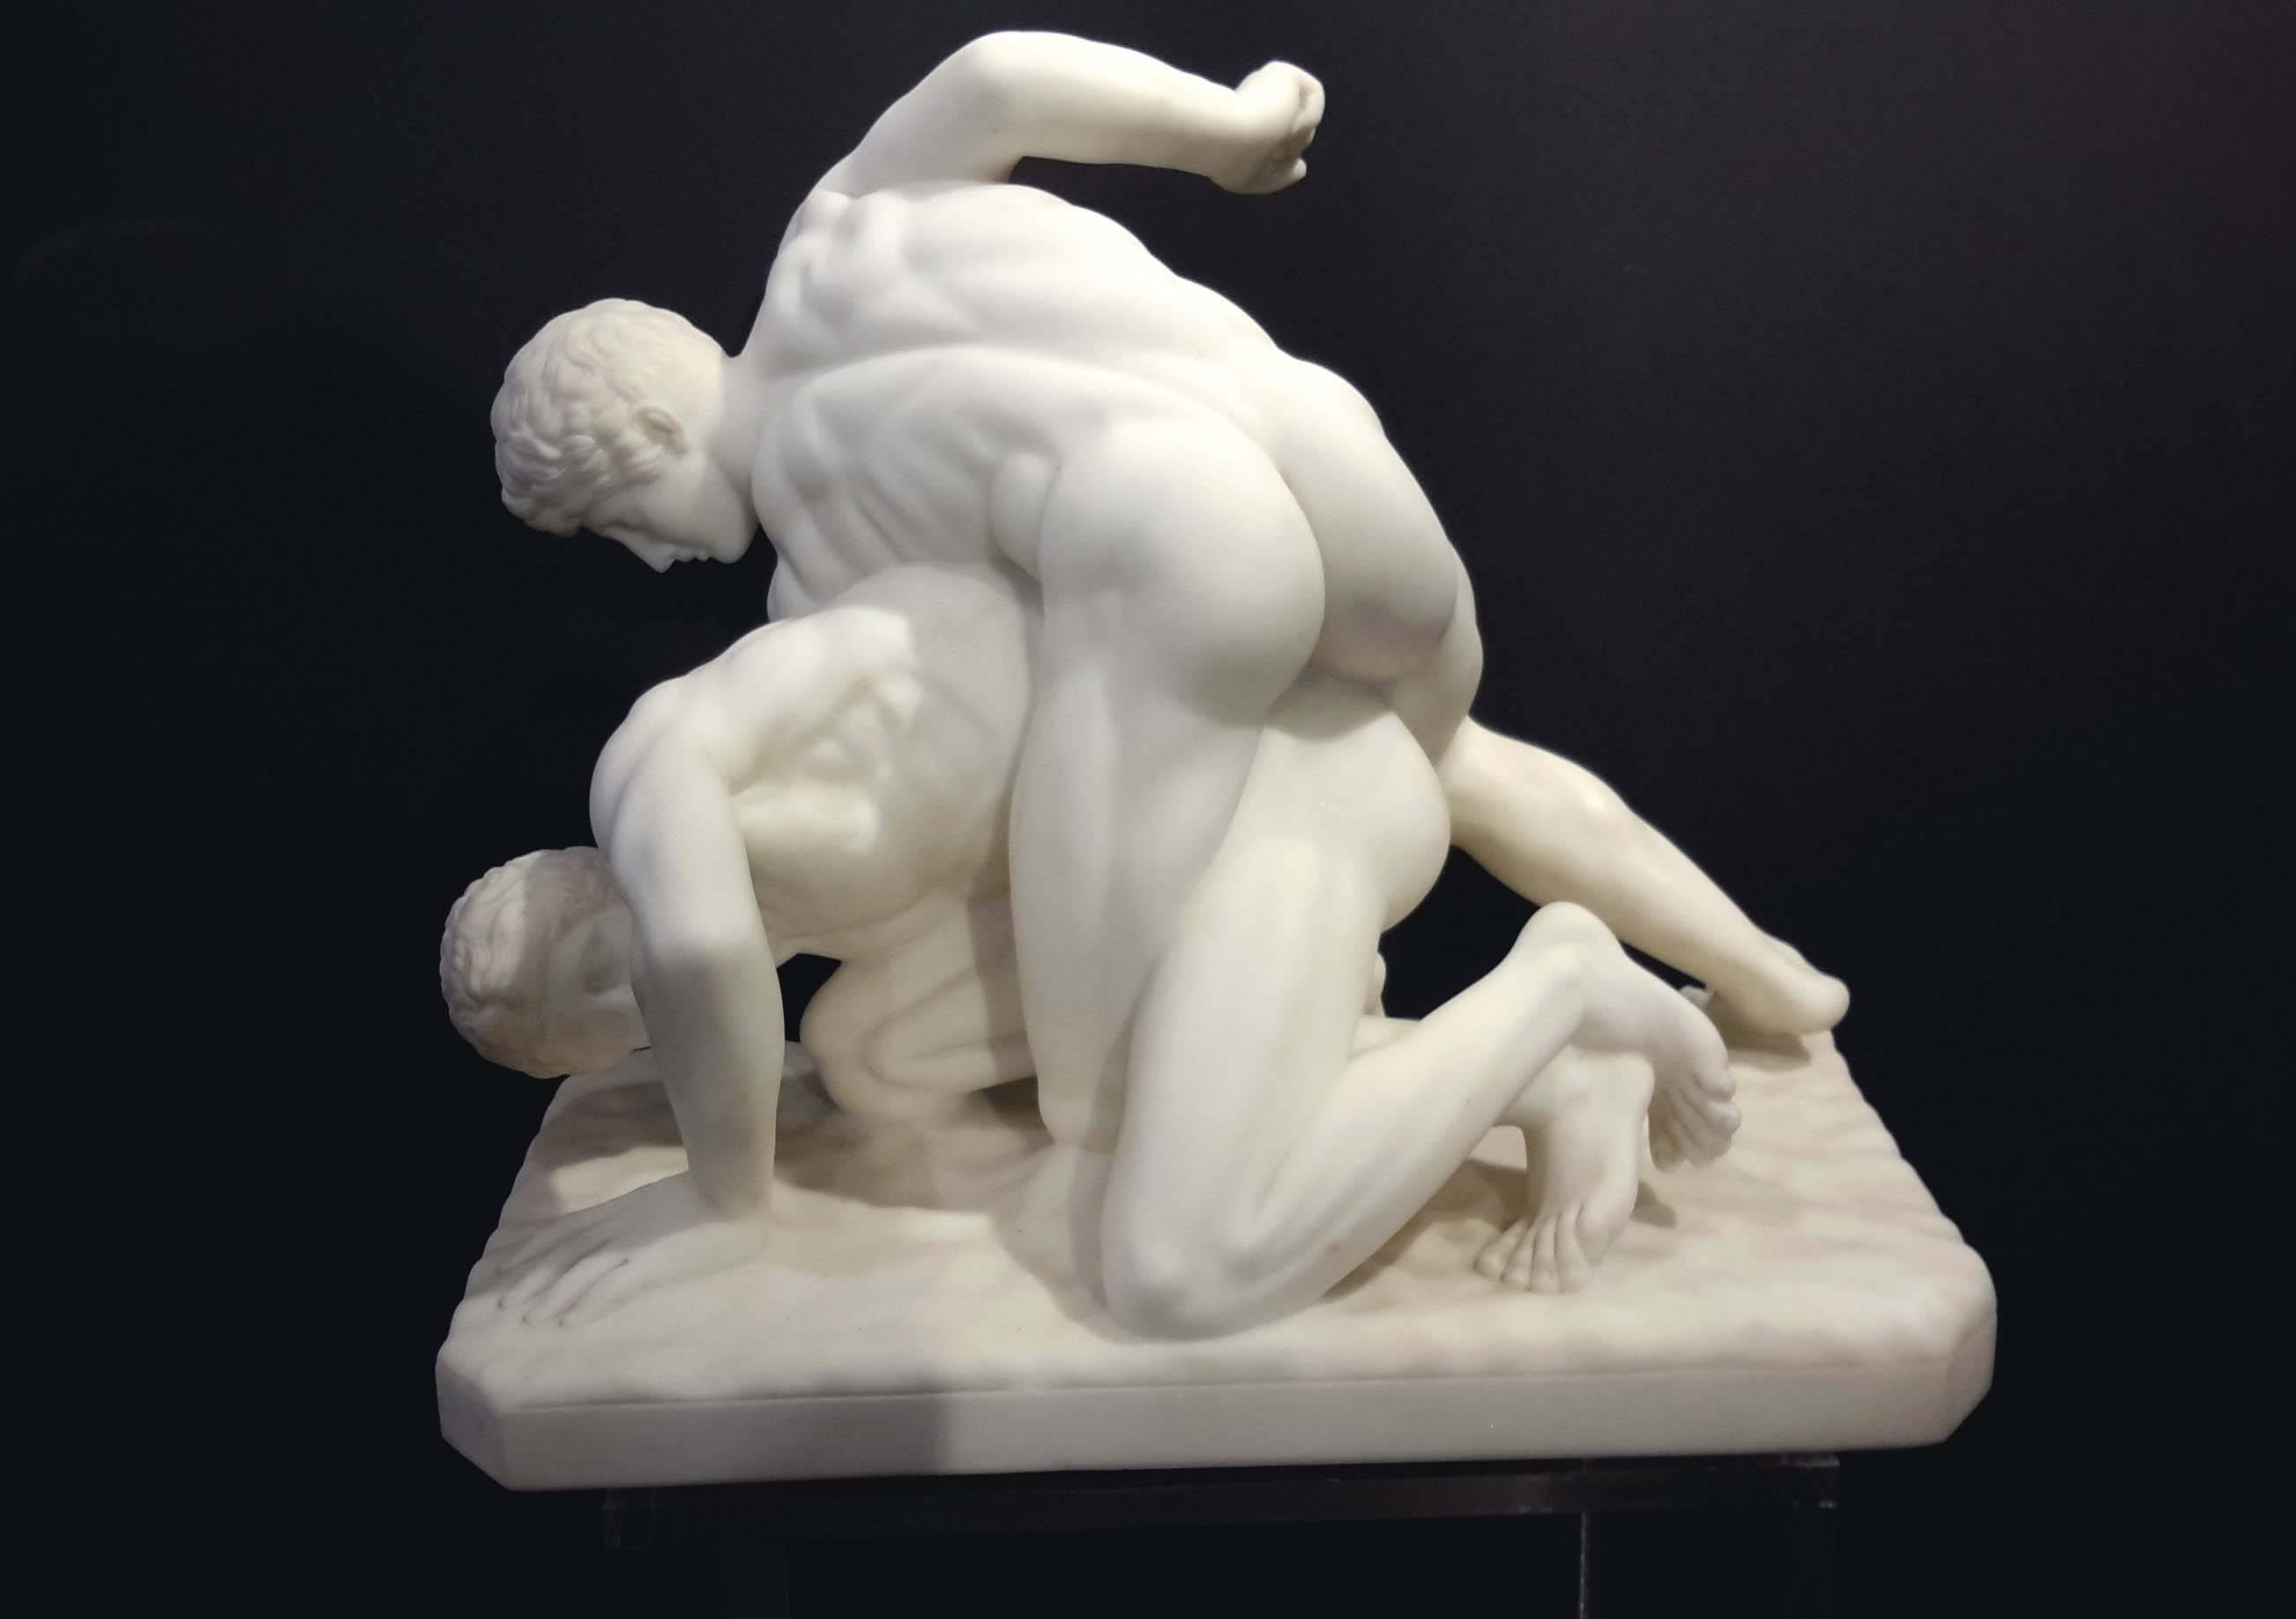 Carrera Marble Sculpture of Two Roman Wrestlers, 19th Century Grand Tour 3